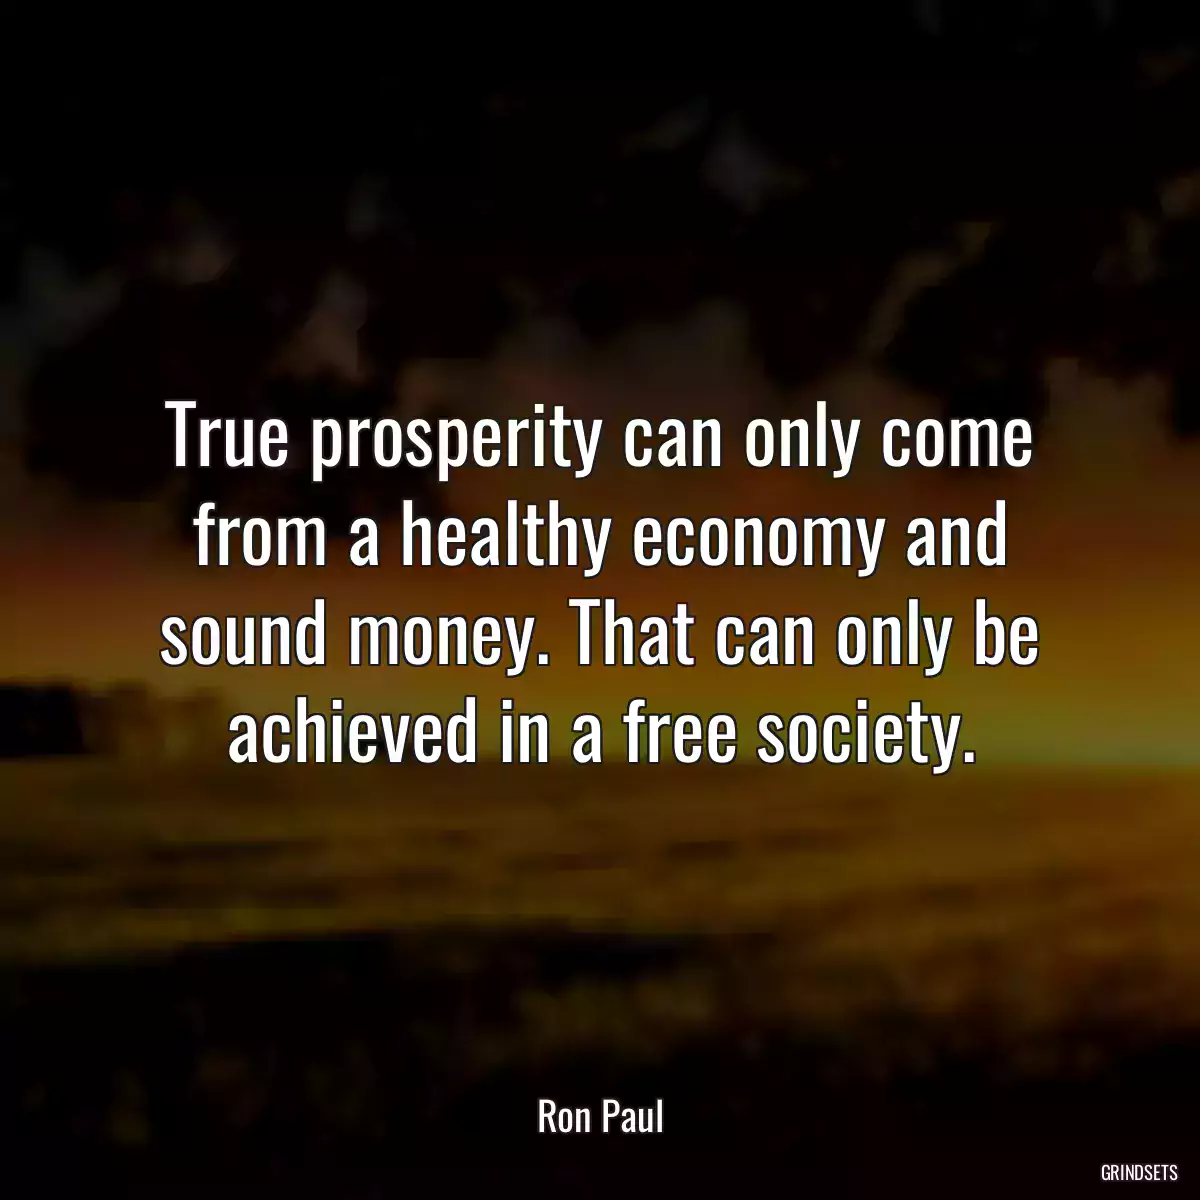 True prosperity can only come from a healthy economy and sound money. That can only be achieved in a free society.